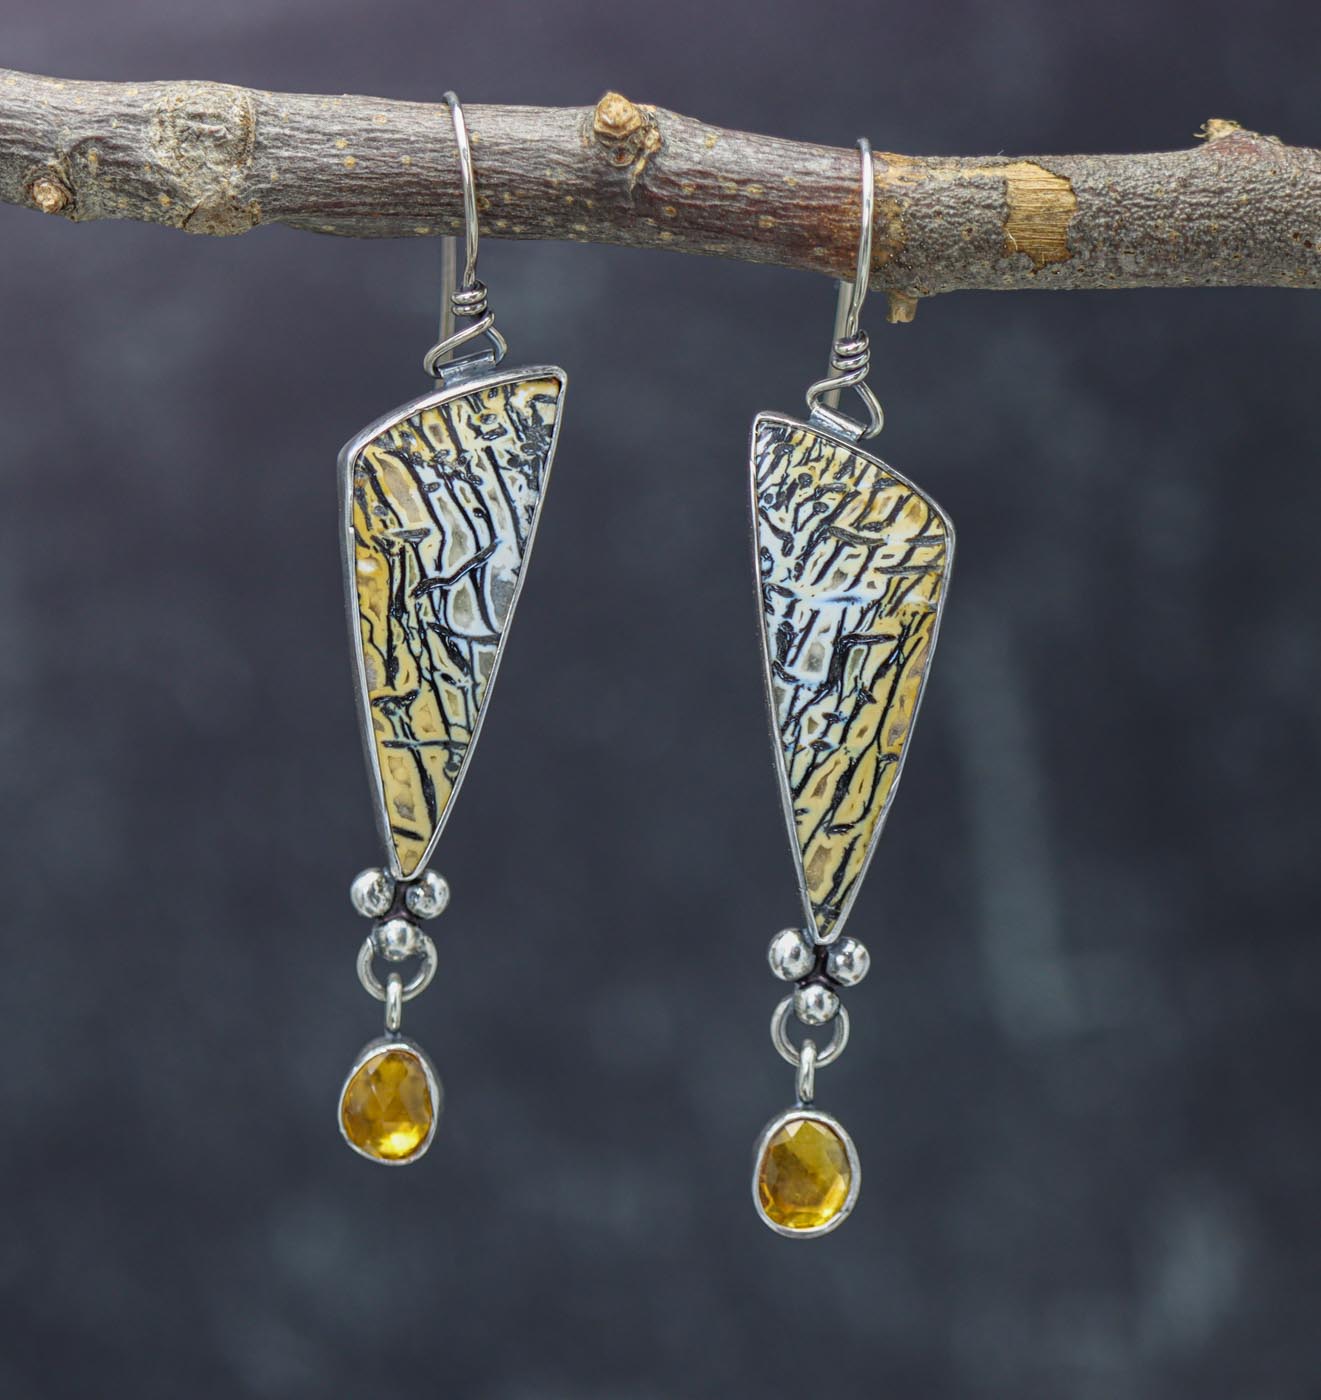 Wildcat Petrified Wood and Citrine Earrings Sterling Silver